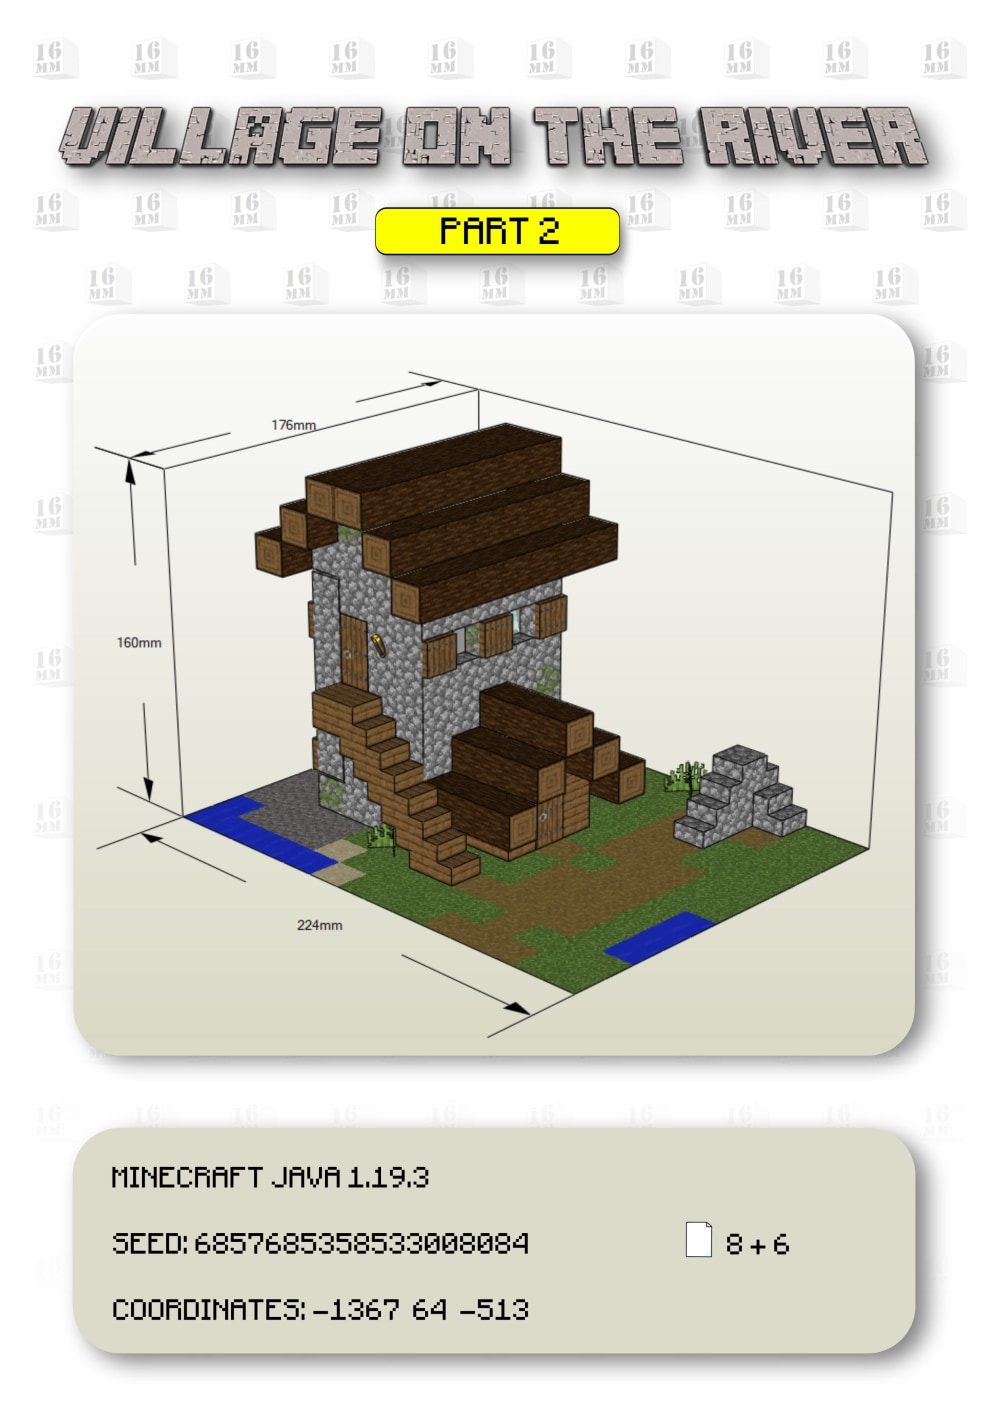 Larger Scale Minecraft Printable Block Collection ~ FPSXGames